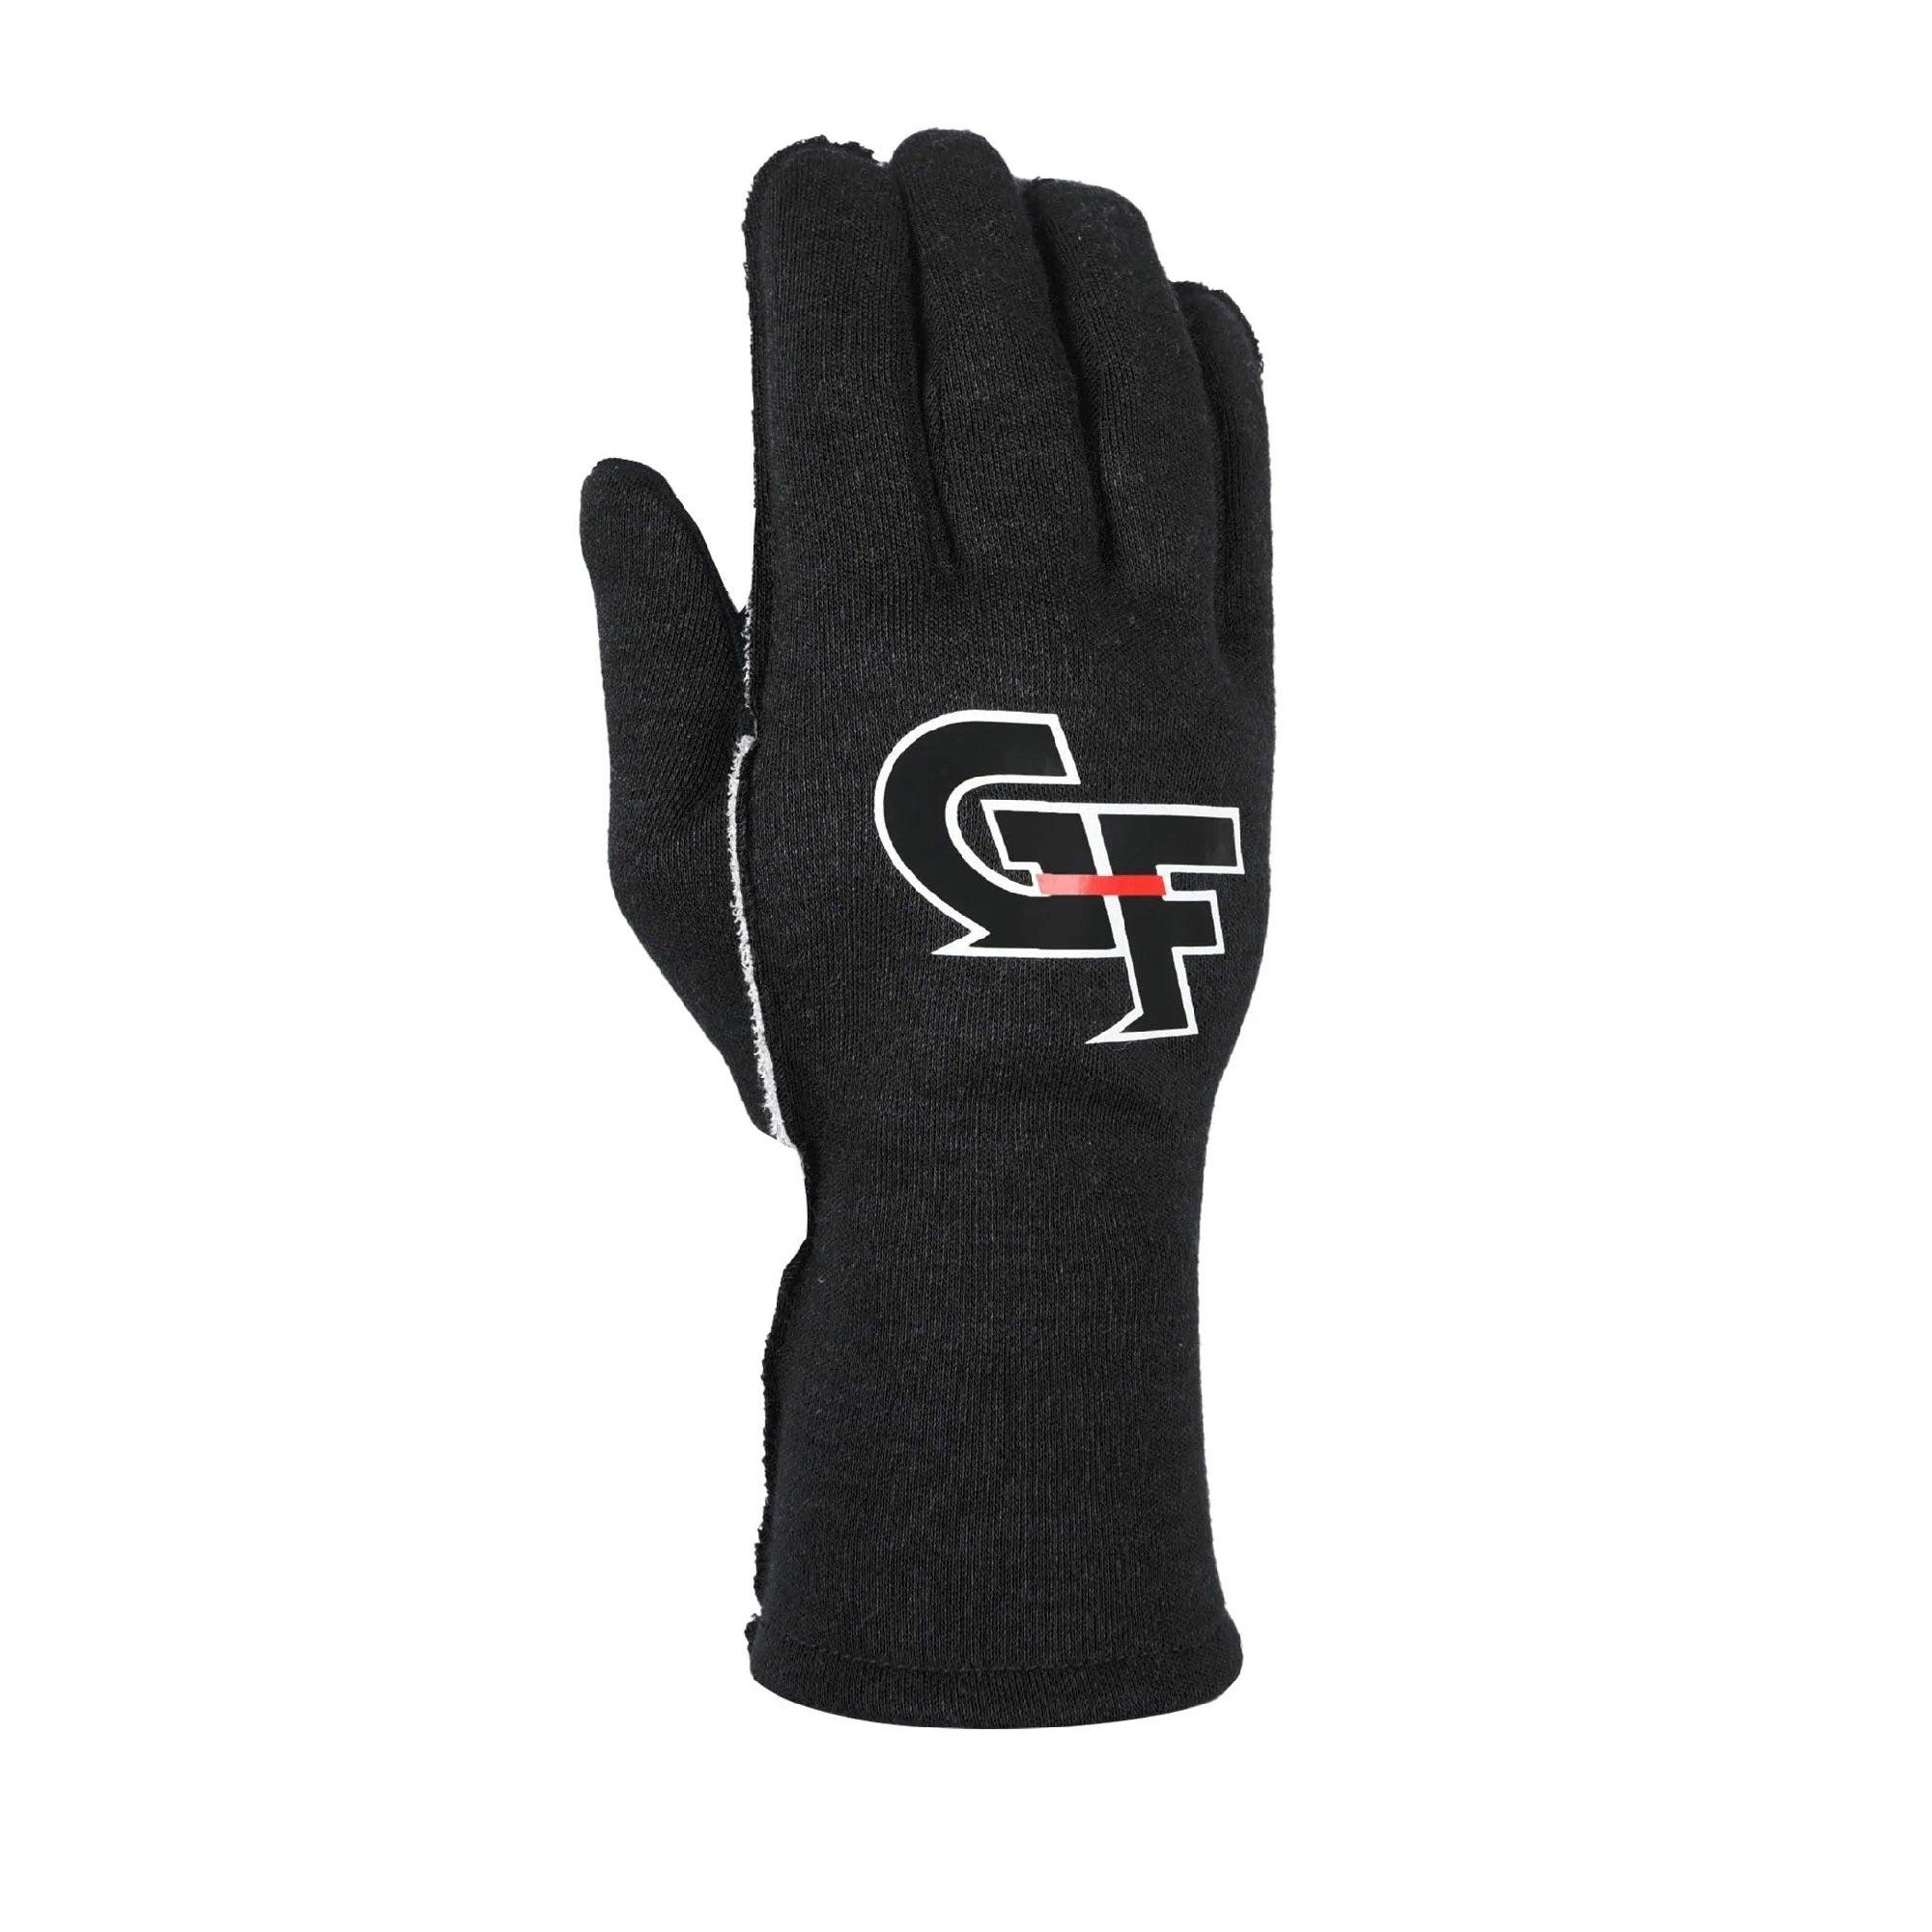 Gloves G-Limit Youth Small Black - Burlile Performance Products